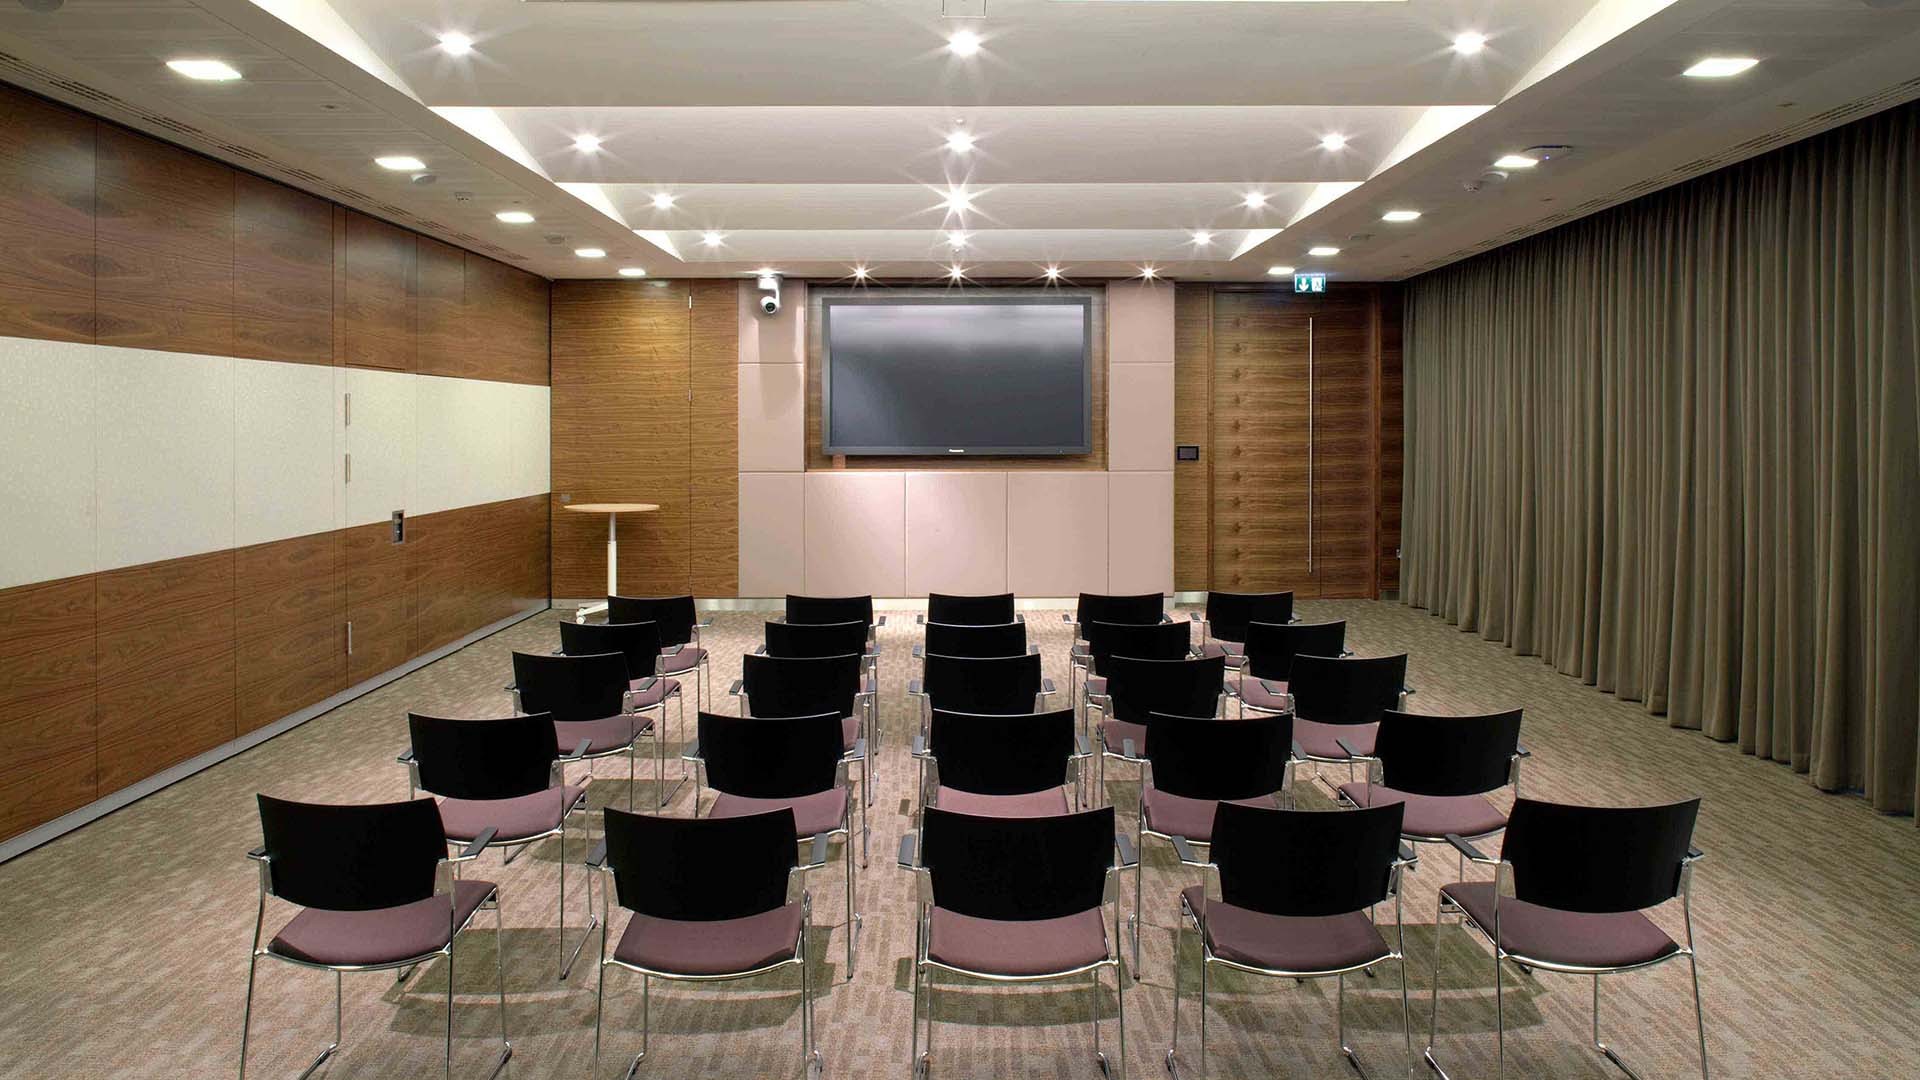 Commercial Office Work Auditorium Space Lighting Design Nulty